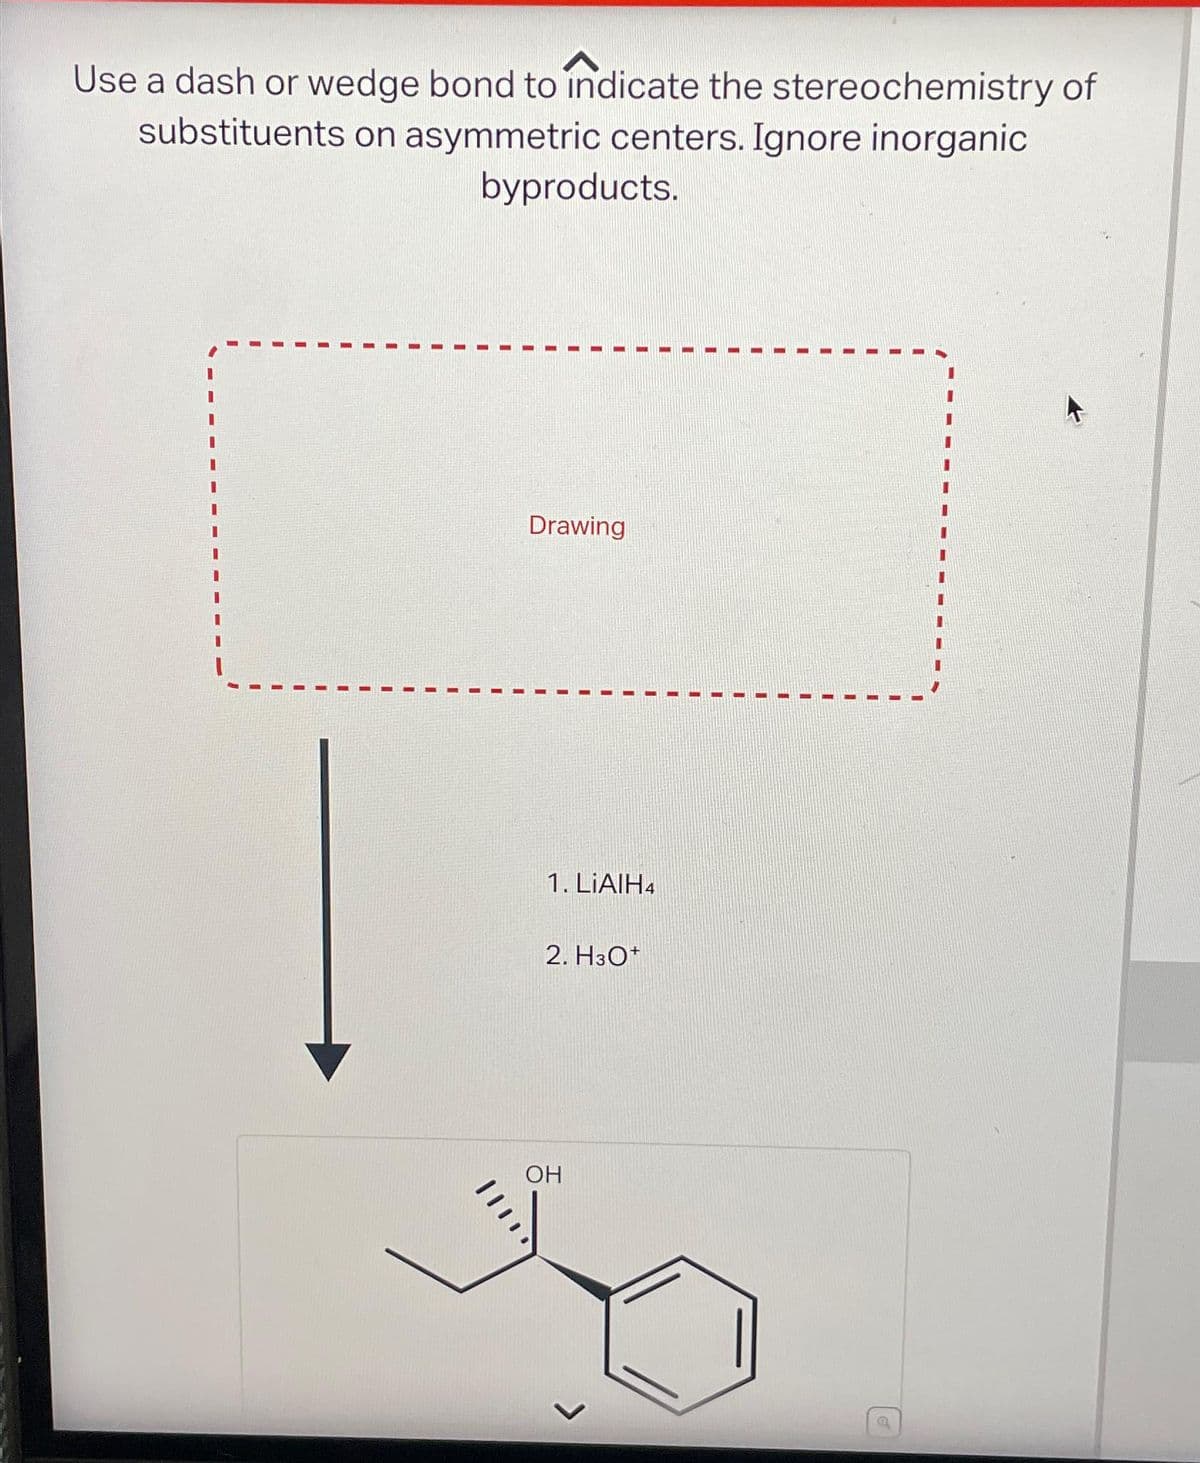 Use a dash or wedge bond to indicate the stereochemistry of
substituents on asymmetric centers. Ignore inorganic
byproducts.
Drawing
1. LiAlH4
2. H3O+
OH
a